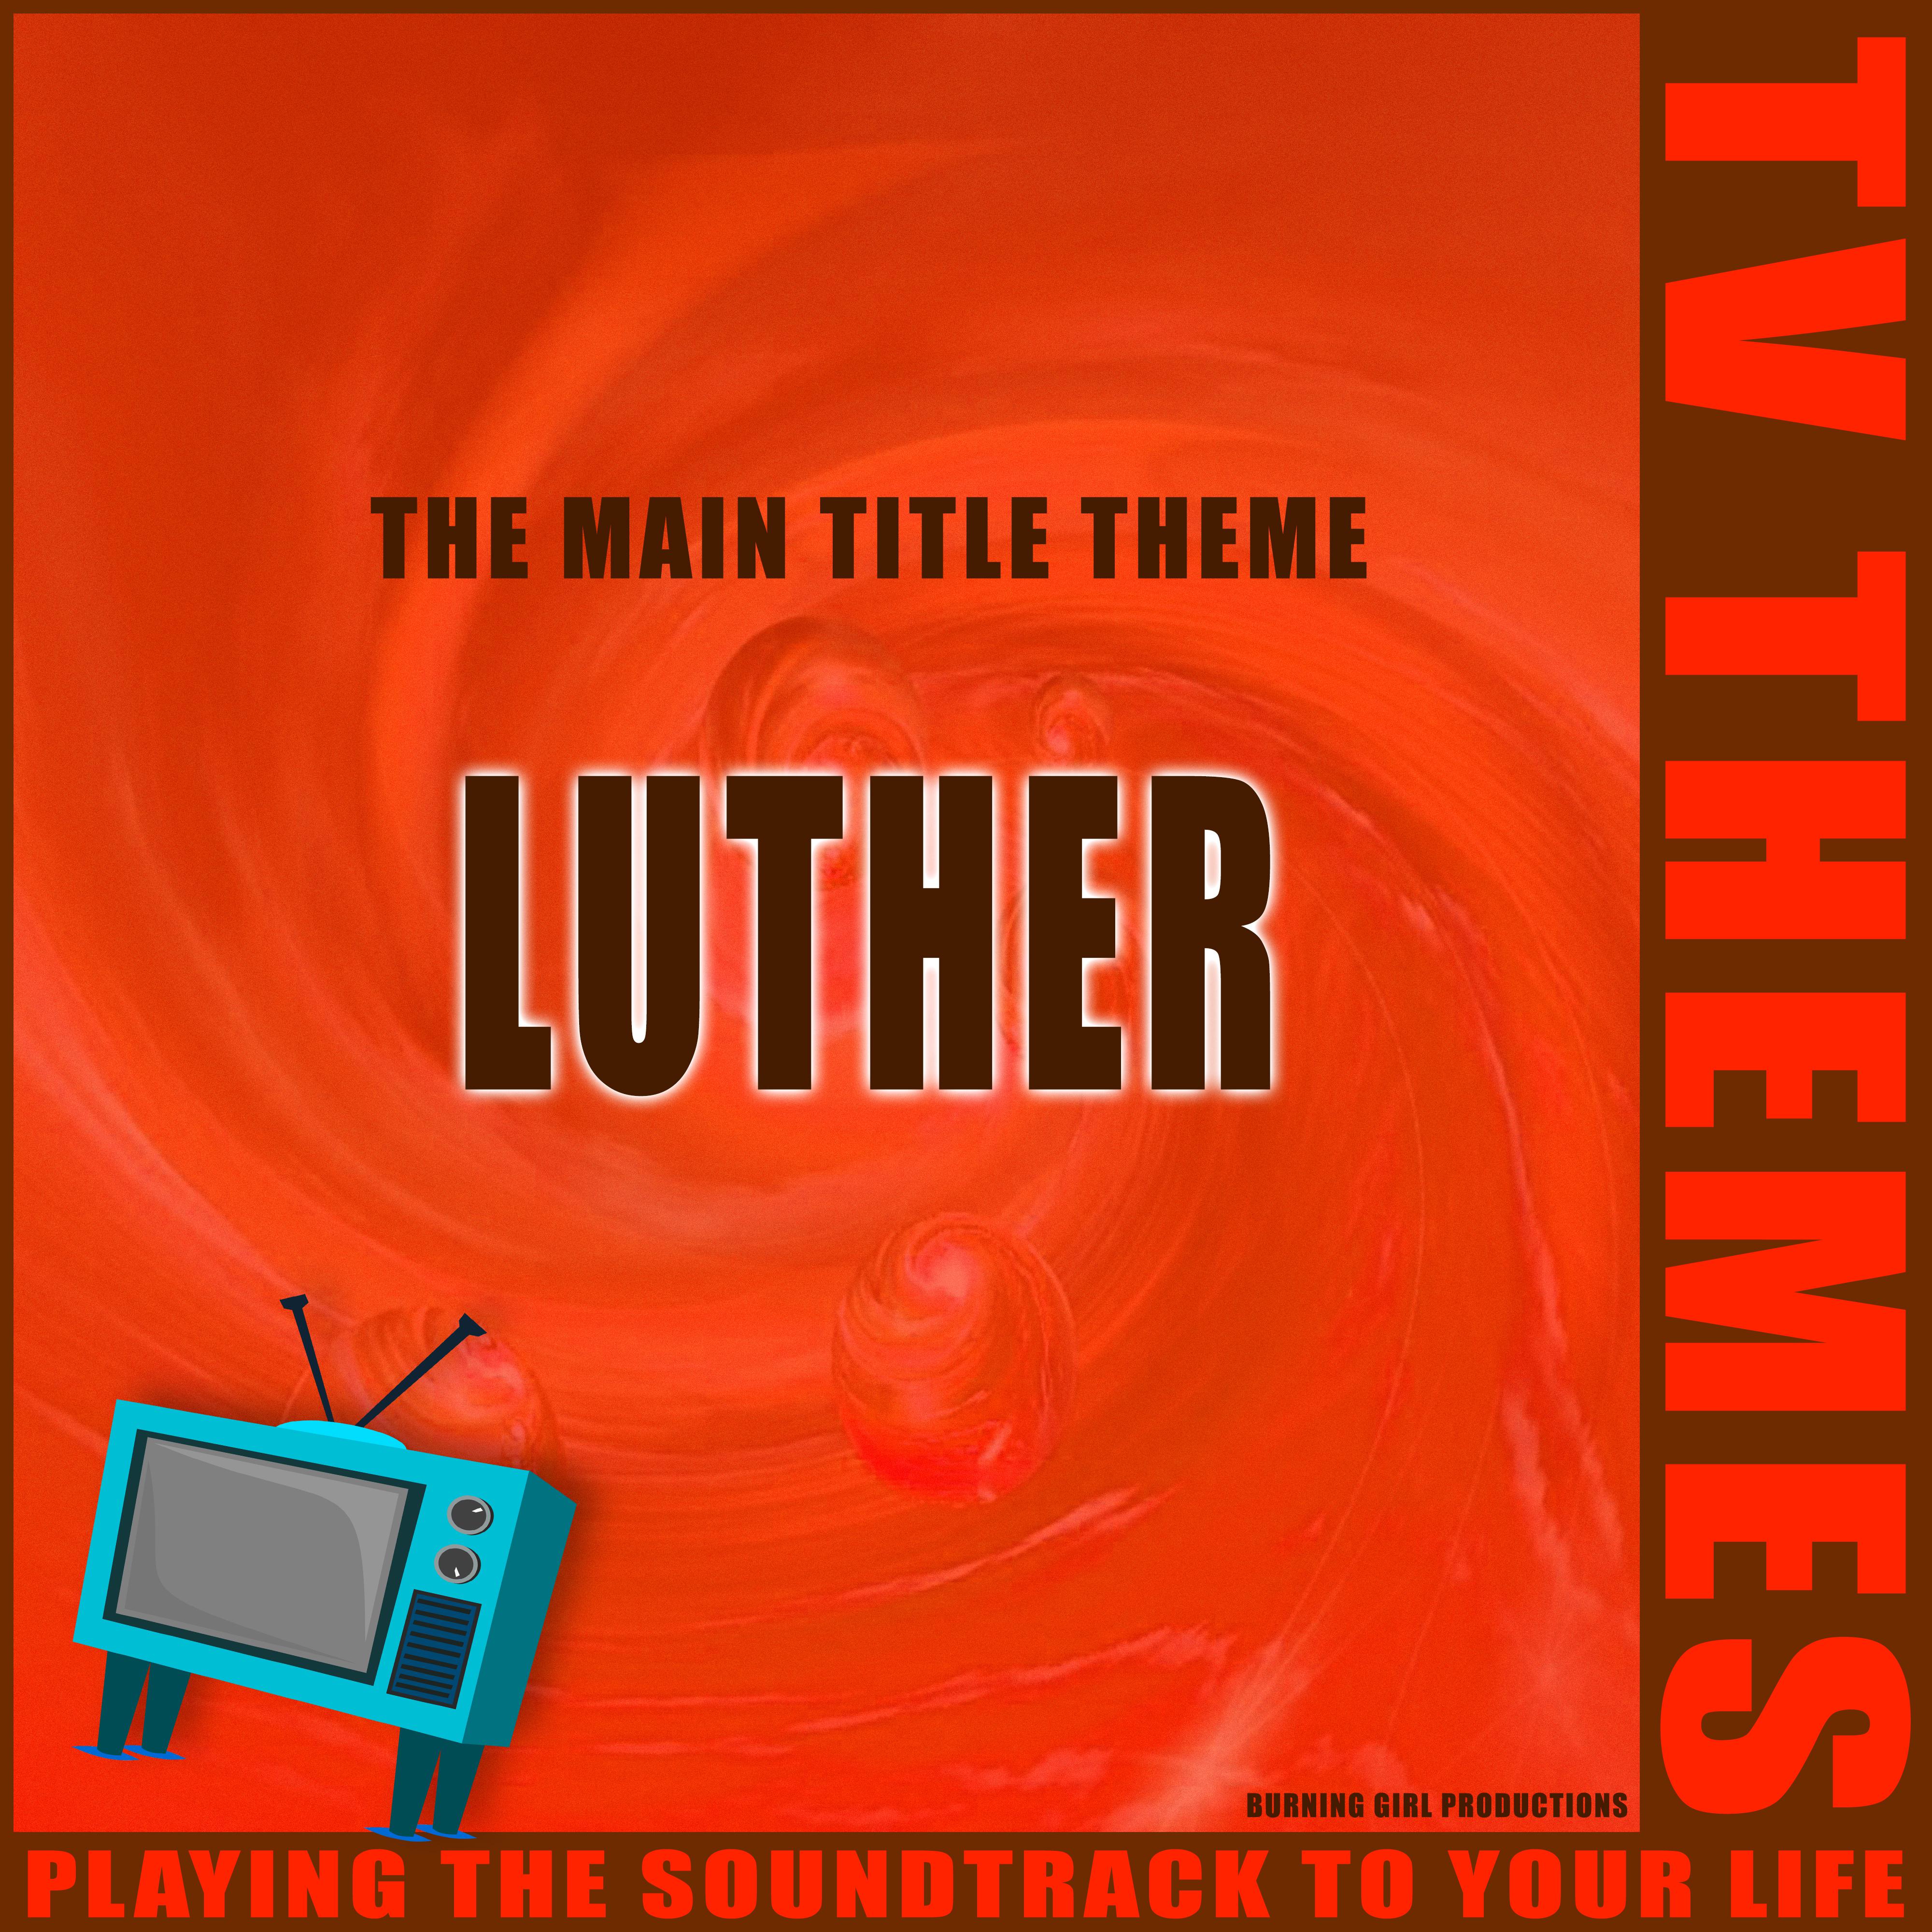 The Main Title Theme - Luther